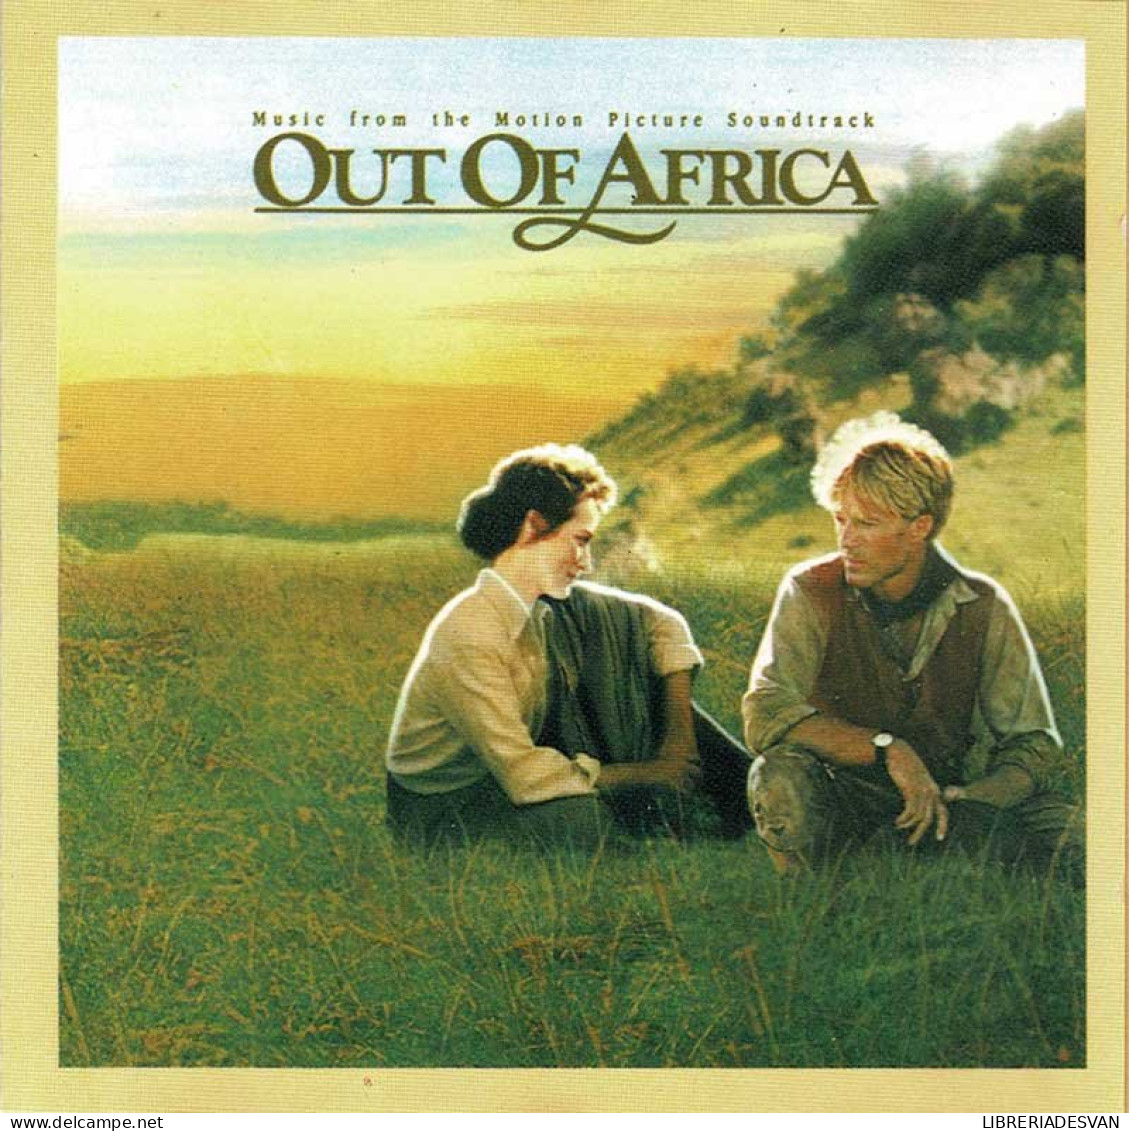 John Barry - Out Of Africa - Memorias De Africa (Music From The Motion Picture Soundtrack). CD - Musique De Films